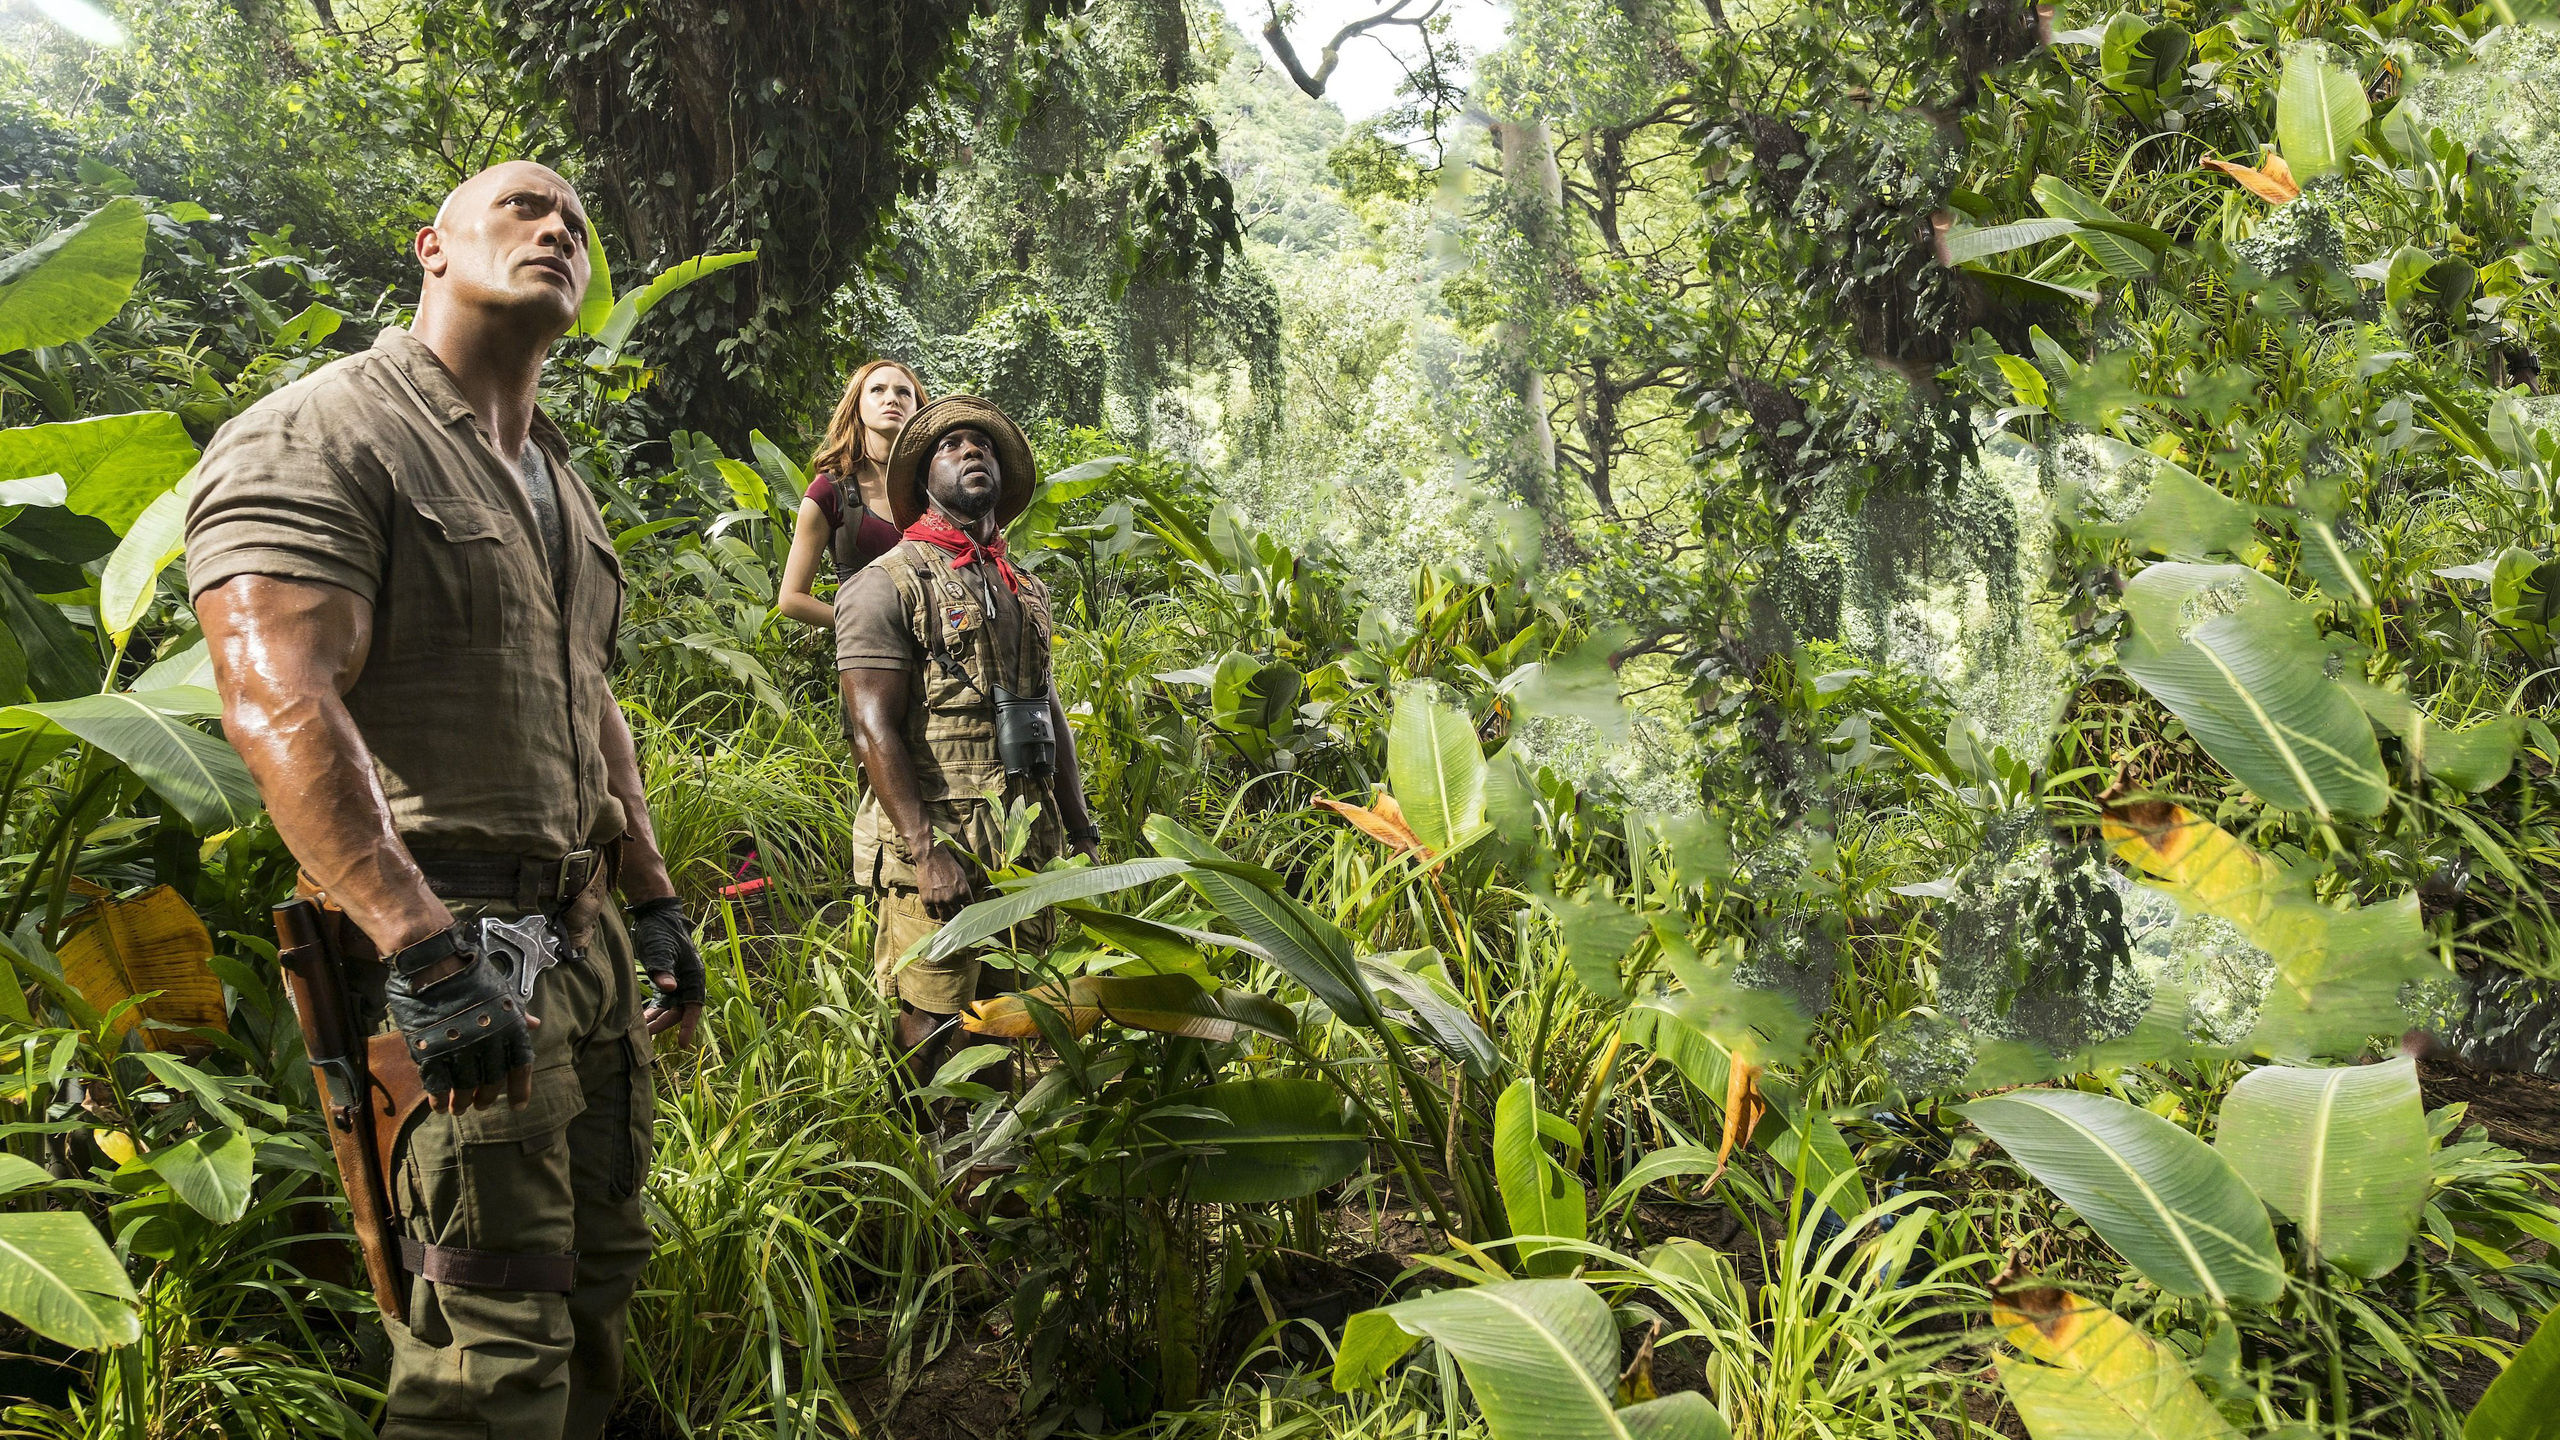 Jumanji: Welcome to the Jungle, 2017 Movie 1440p, Images and photos, 2560x1440 HD Desktop